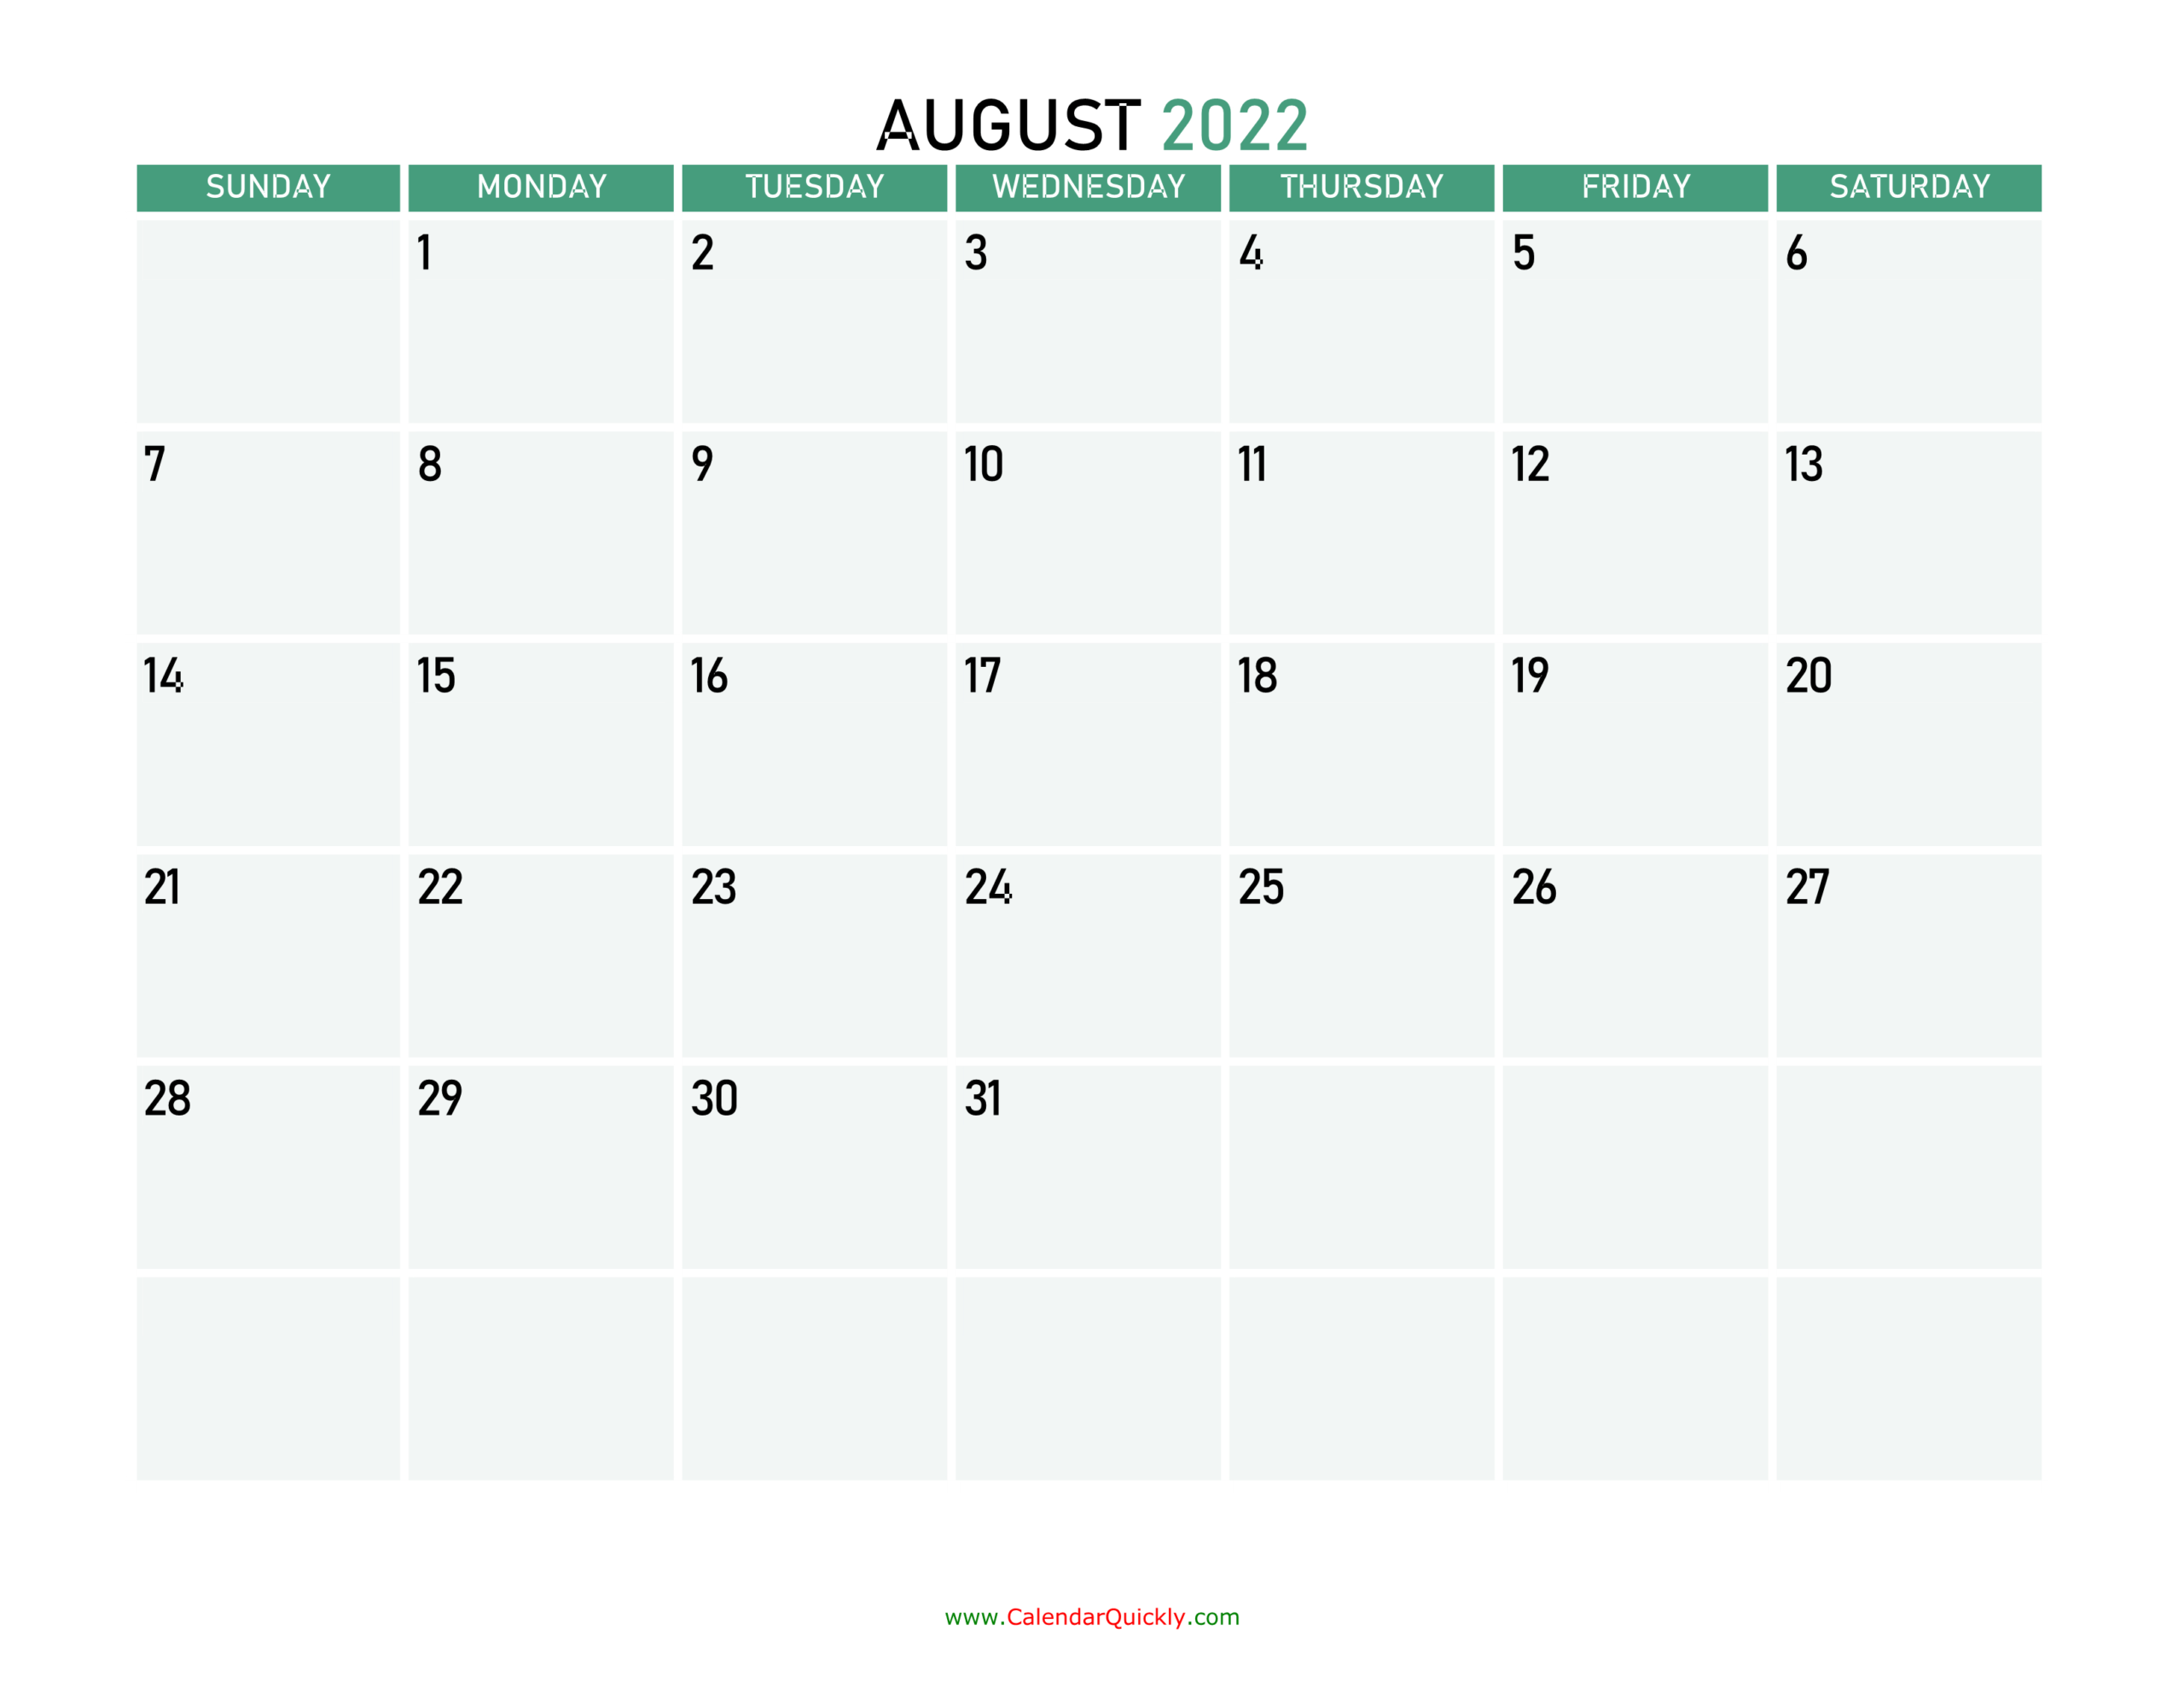 August 2022 Calendars | Calendar Quickly  Astronomy Picture Of The Day Calendar August 2022